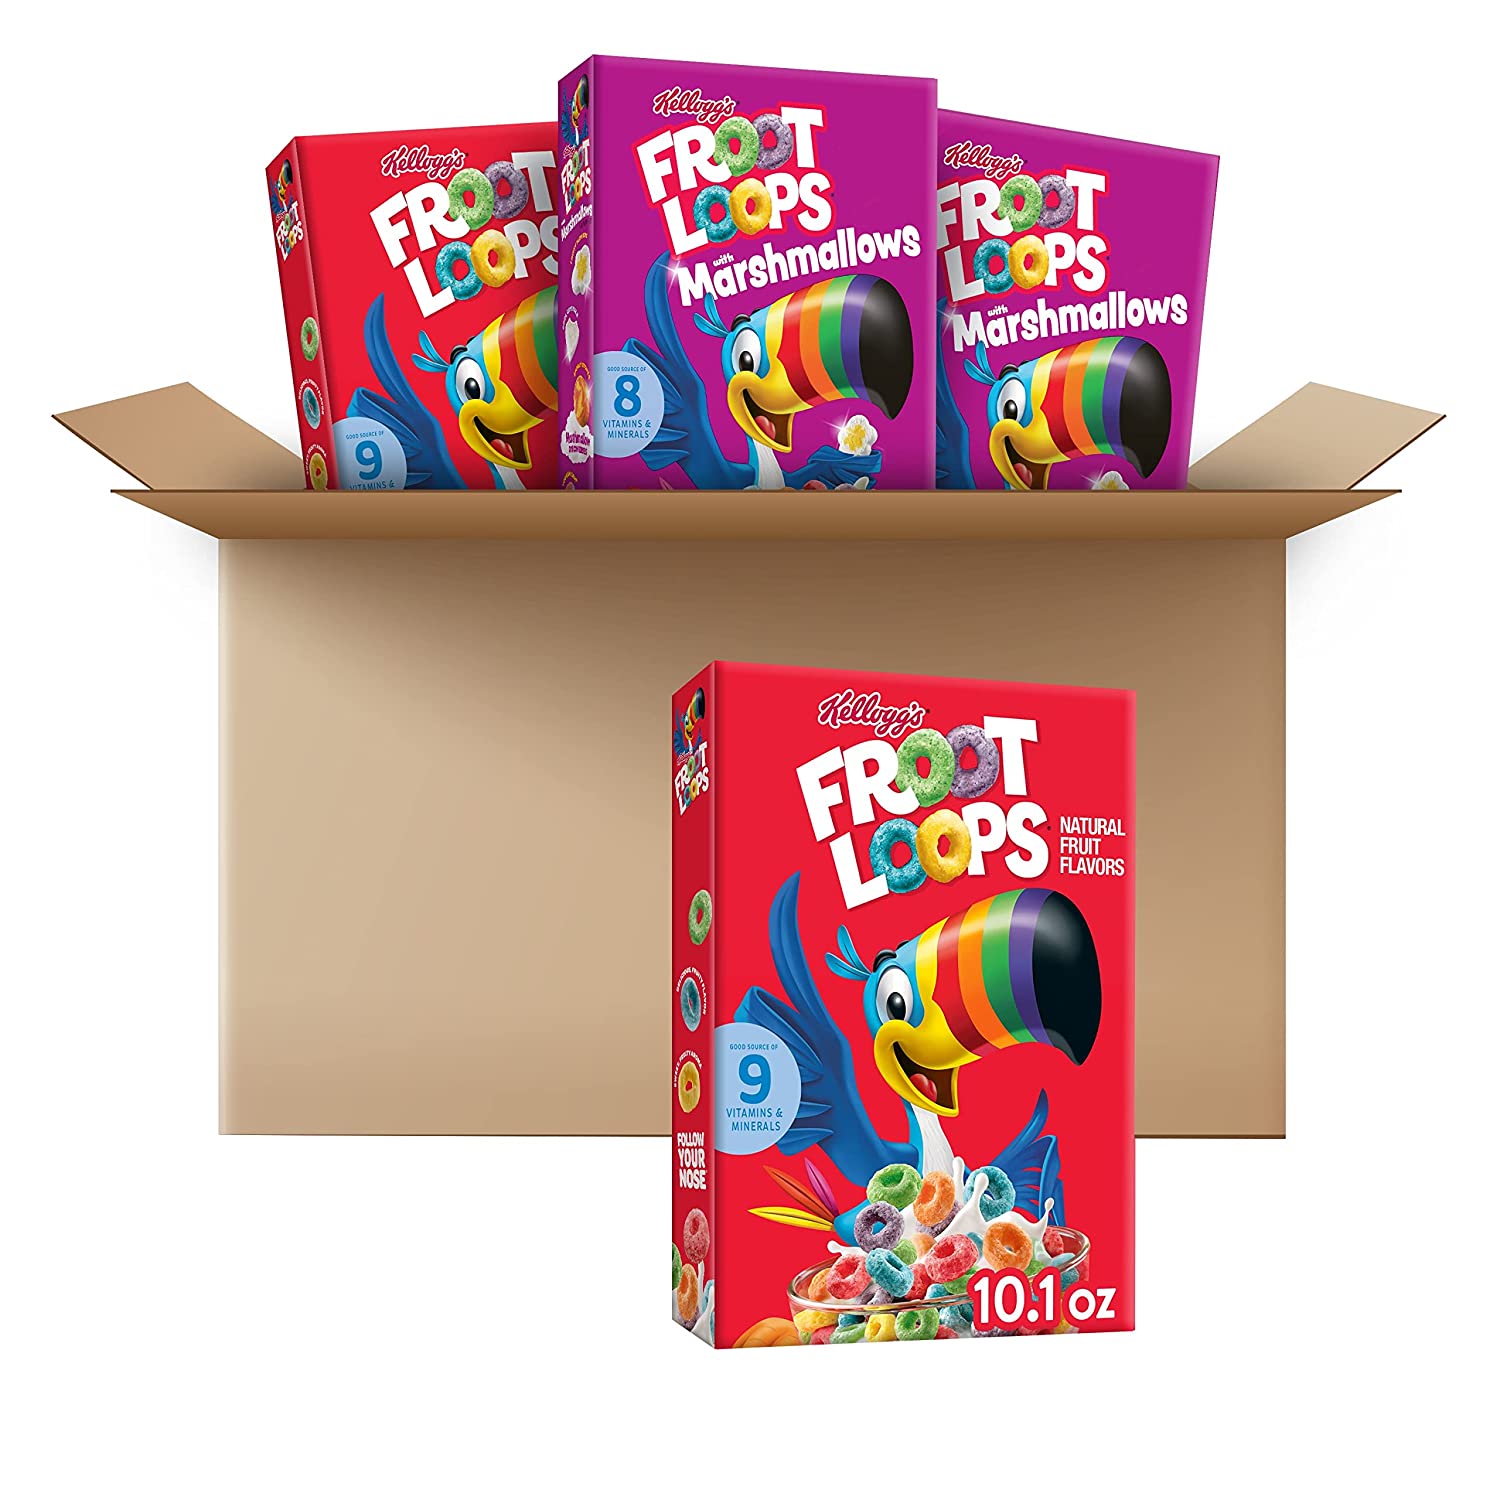 New Kellogg's Froot Loops Breakfast Cereal 2 pk Free Shipping Great  Price.